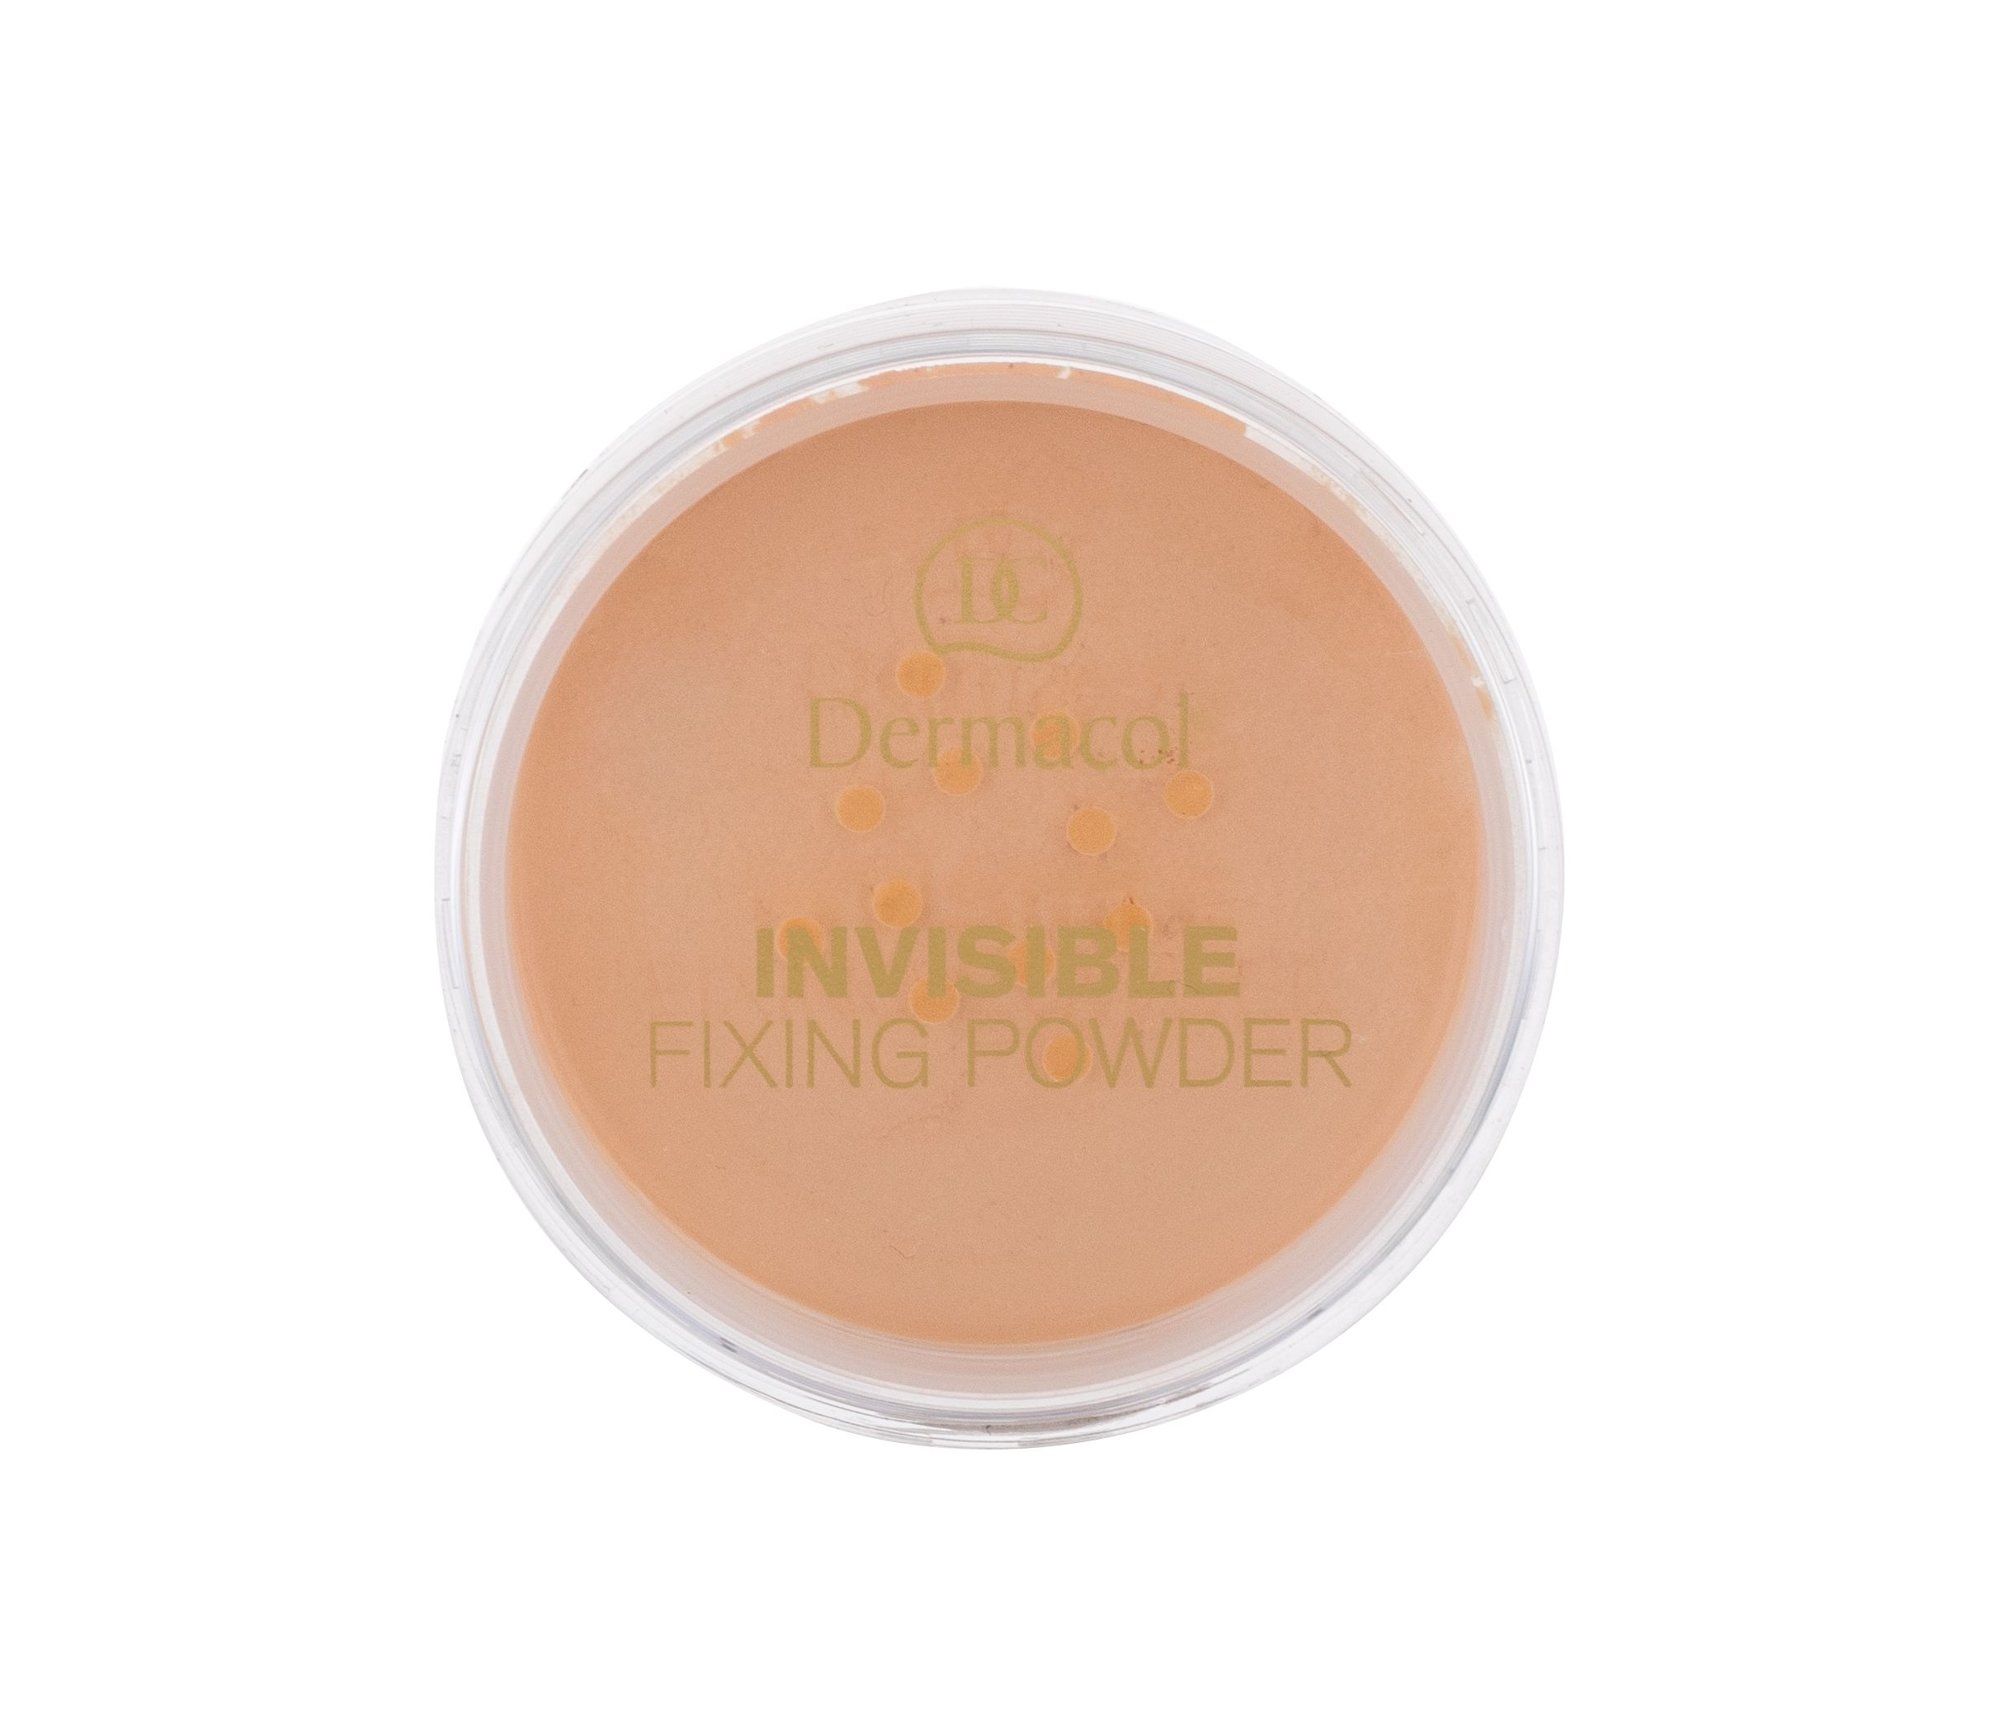 Dermacol Invisible Fixing Powder 13g sausa pudra